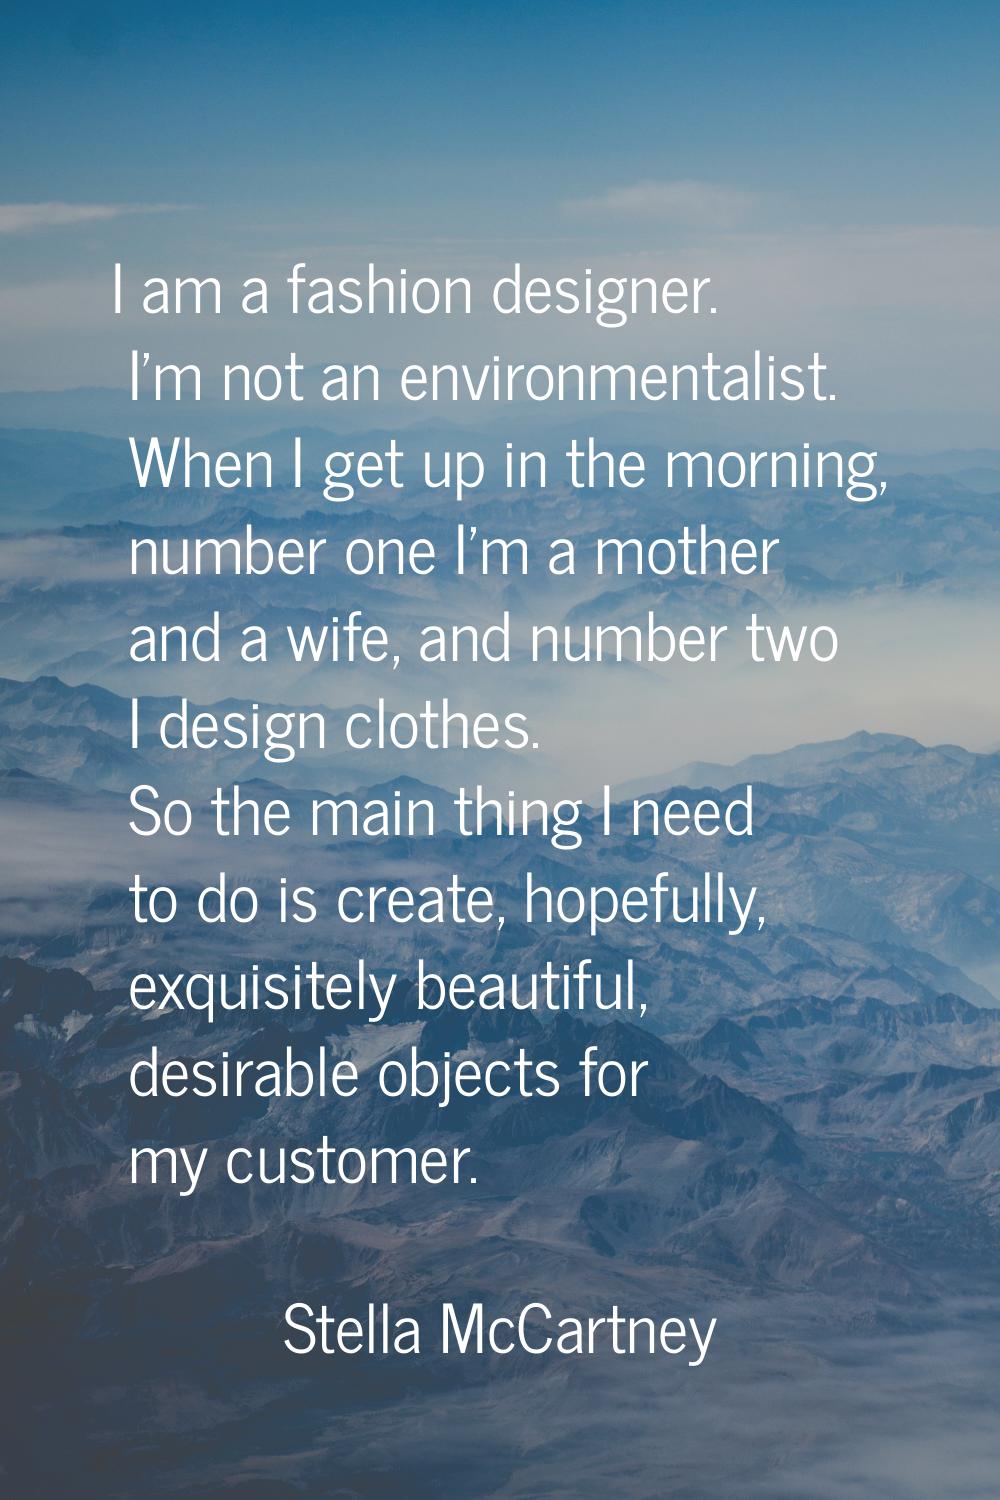 I am a fashion designer. I'm not an environmentalist. When I get up in the morning, number one I'm 